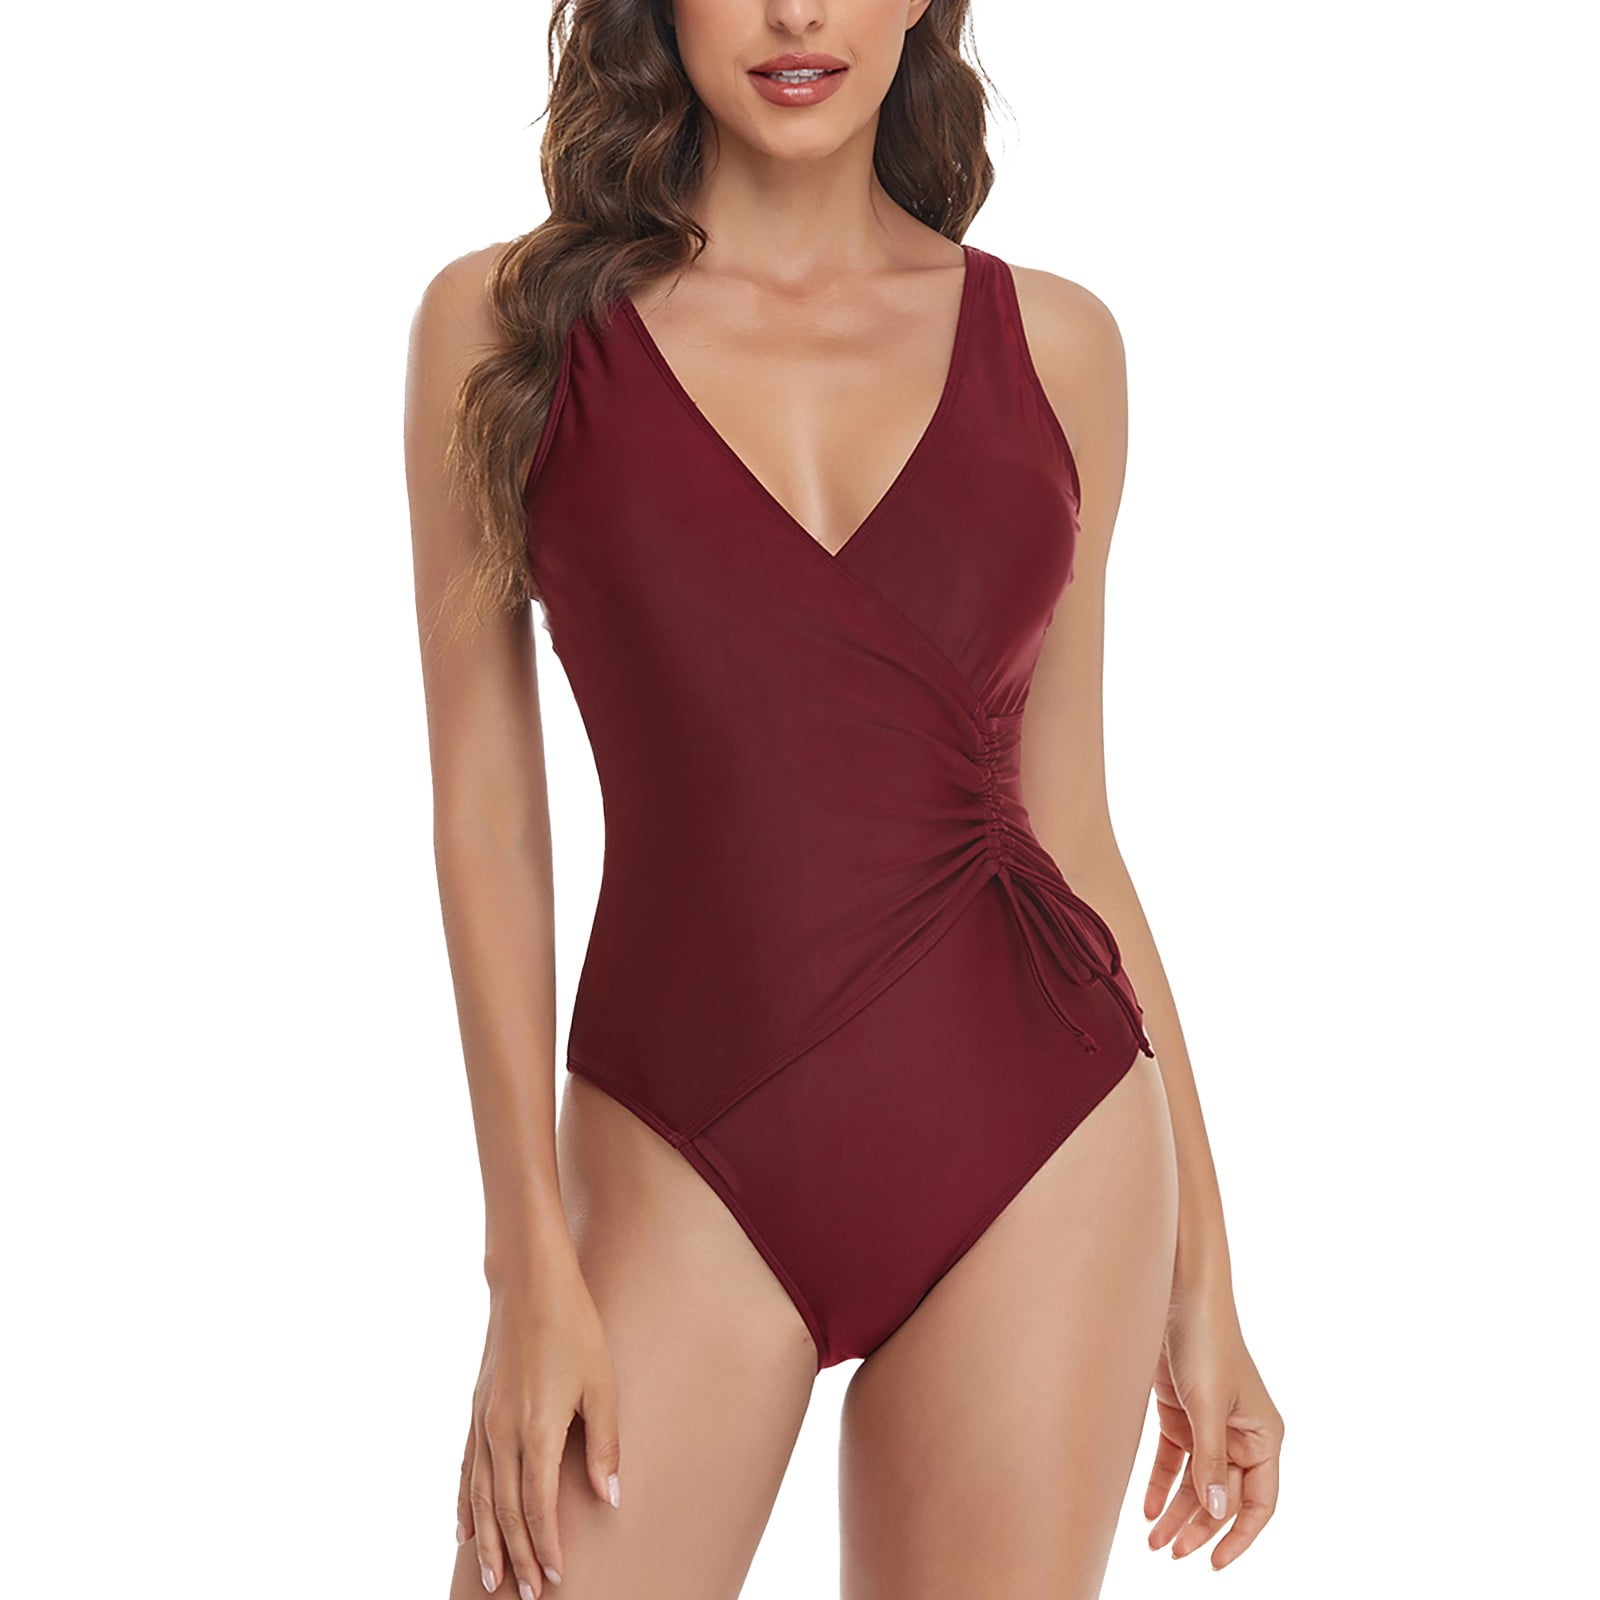 TOWED22 Womens Bathing Suits Tummy Control,Women's One Piece Swimsuit Sexy  Crisscross Lace up Bathing Suit,Wine 